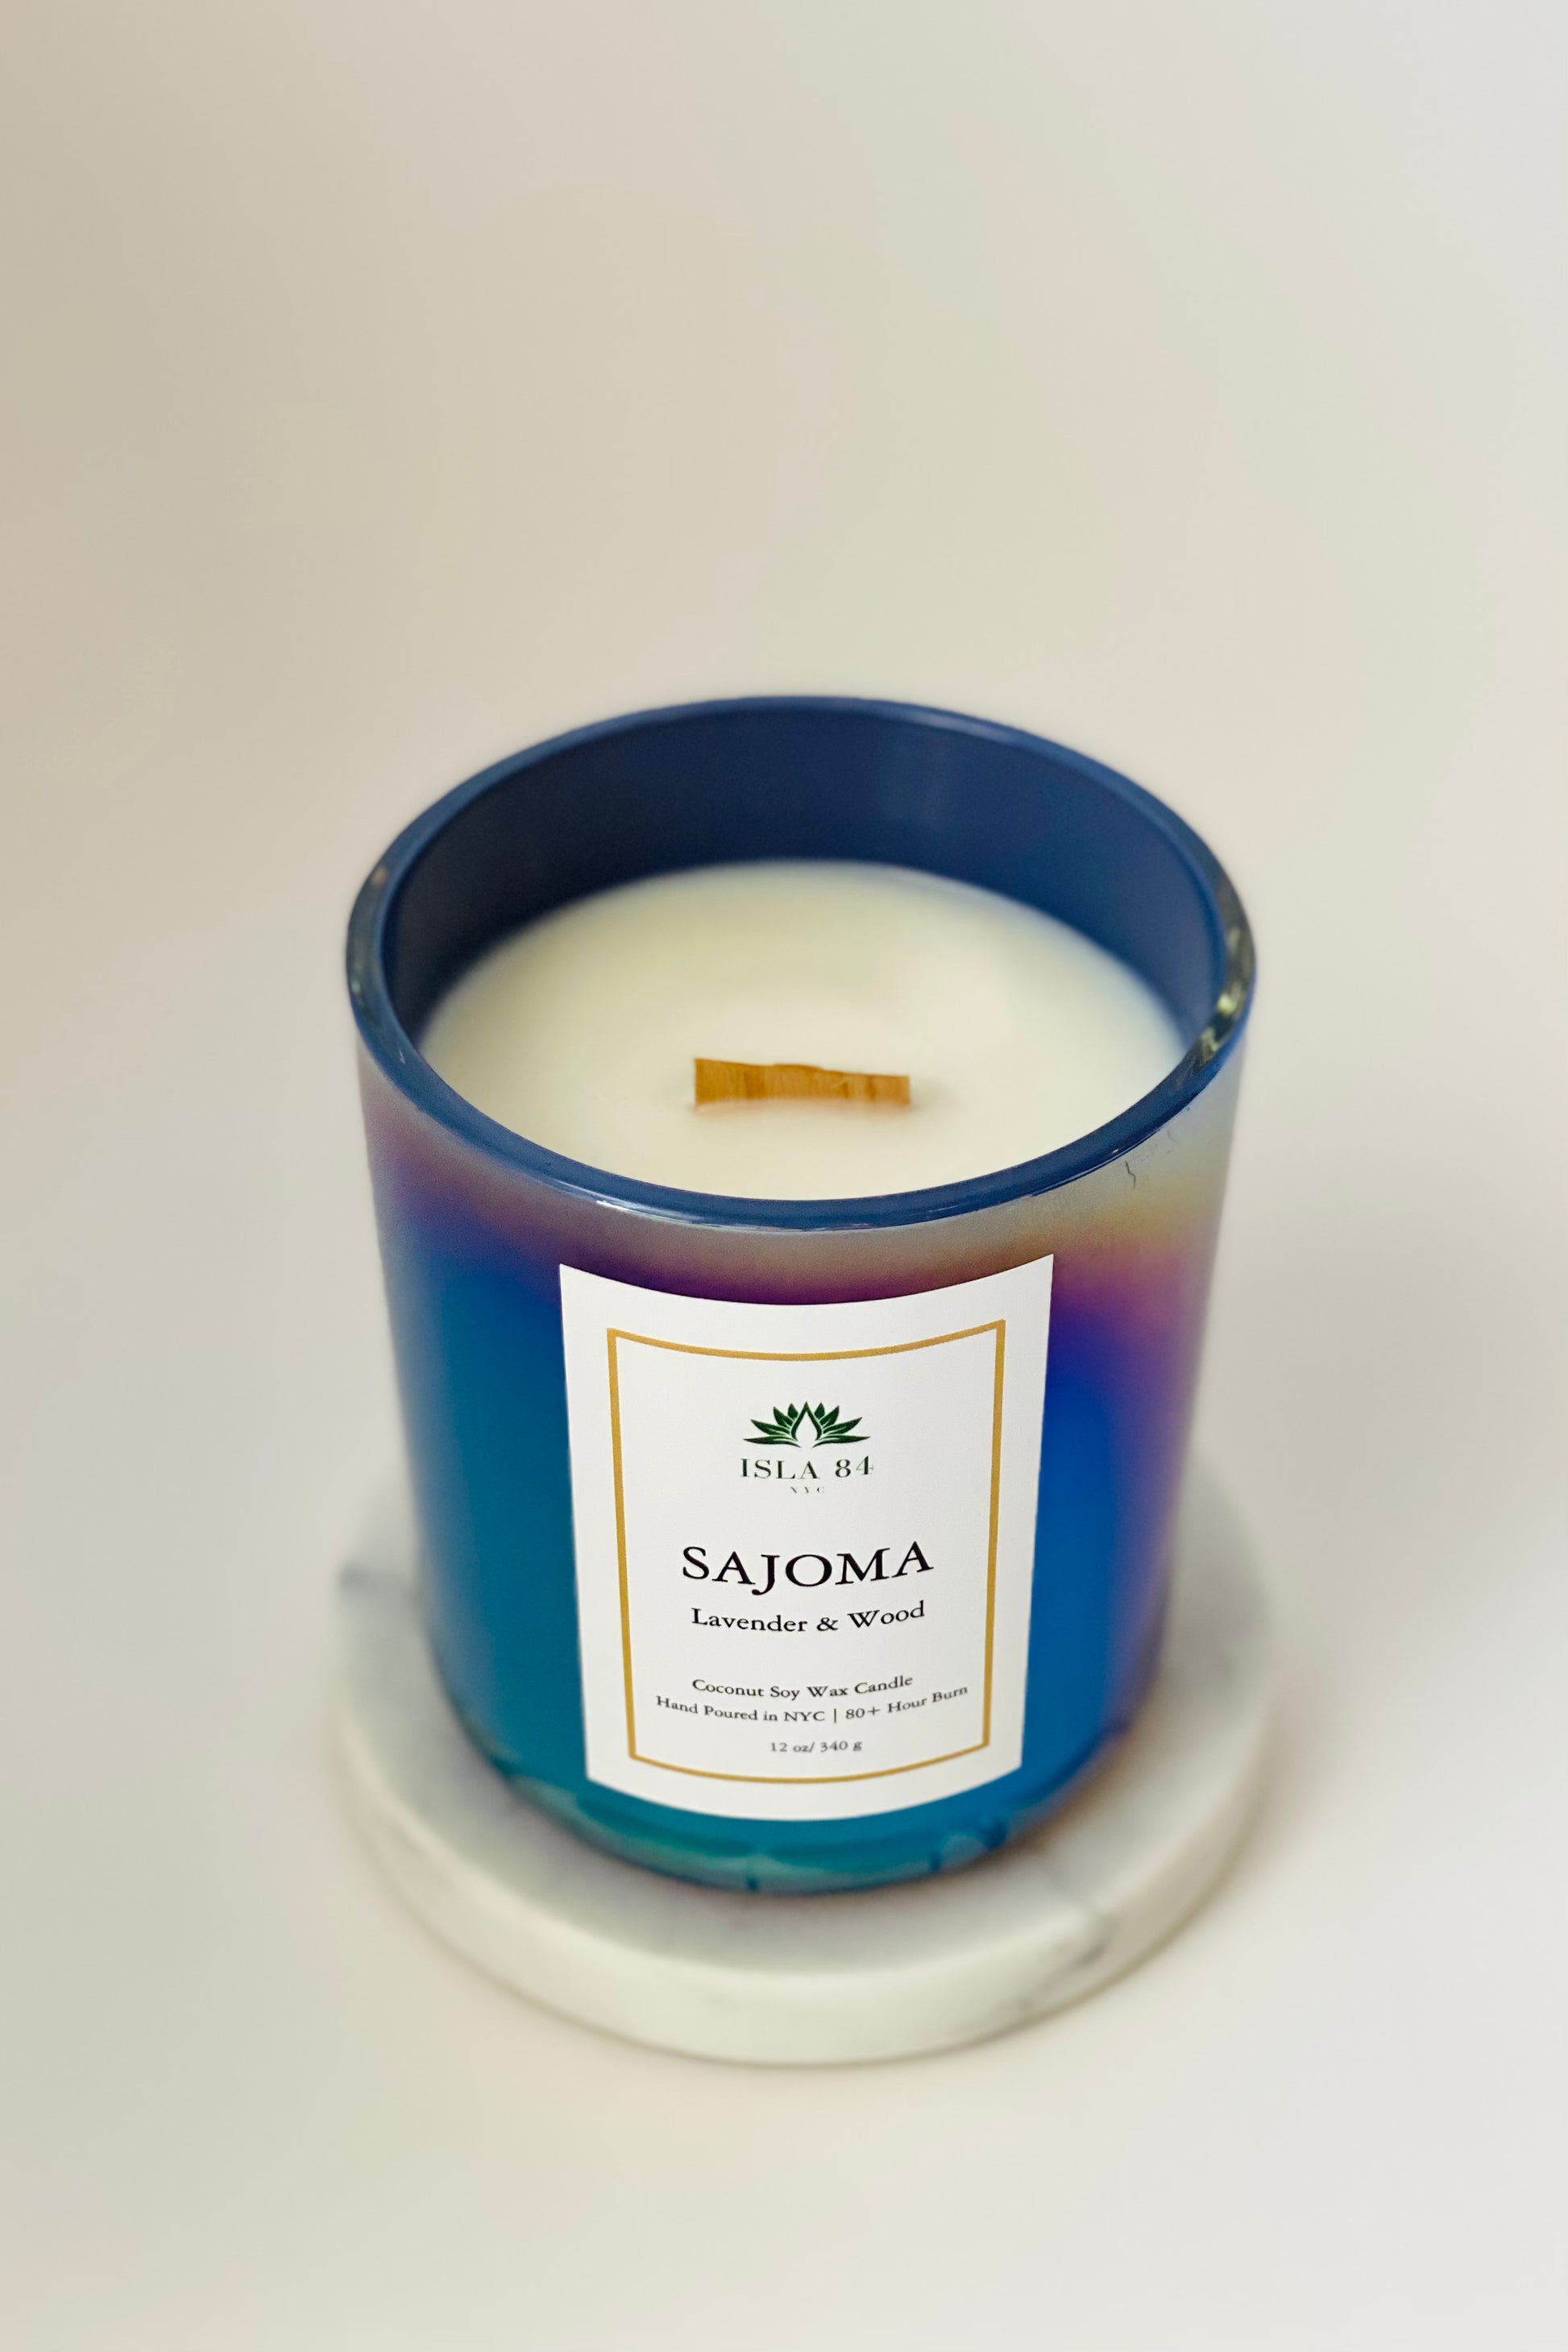  La Jolla Candle - 9 oz Handmade in the USA with 100